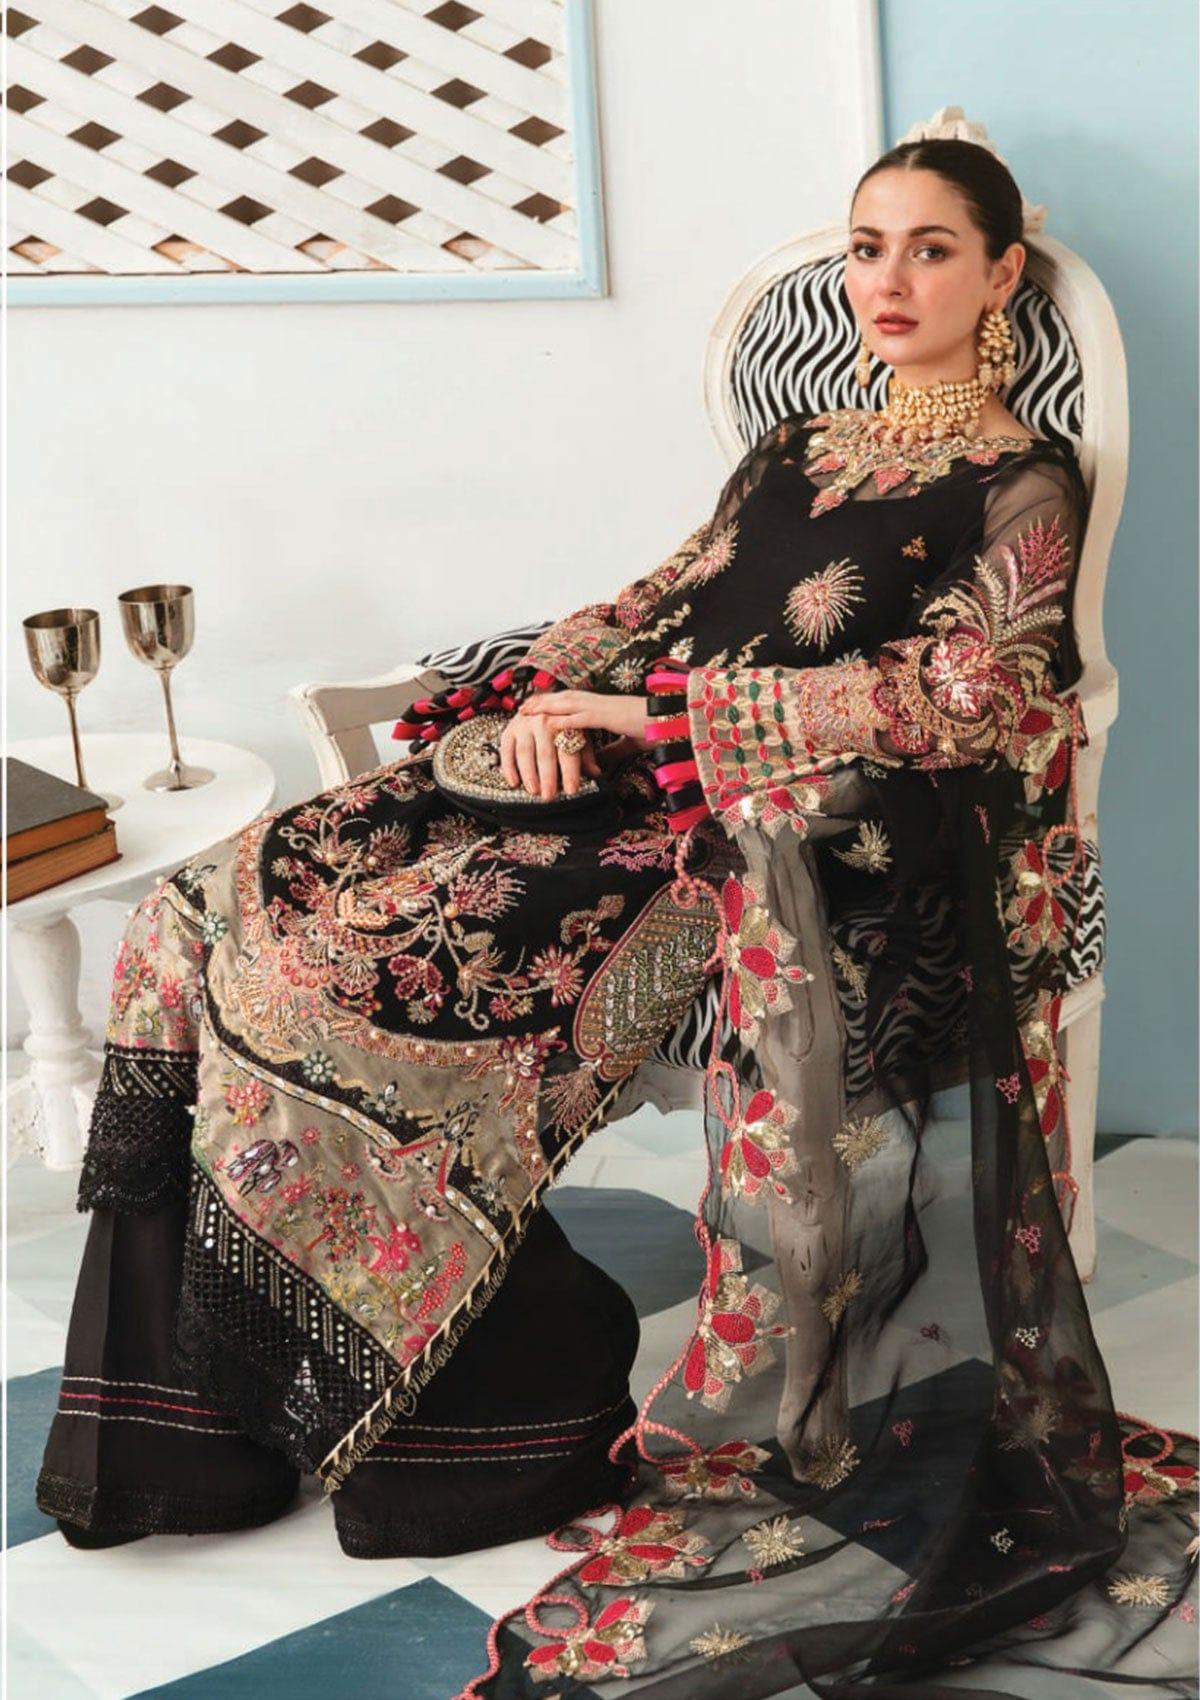 Celebration By Elaf Handwork'22 ECC-08 is available at Mohsin Saeed Fabrics. ✓ shop all the top women clothing brands in pakistan ✓ Best Price and Offers ✓ Free Shipping ✓ Cash on Delivery ✓  latest desgins